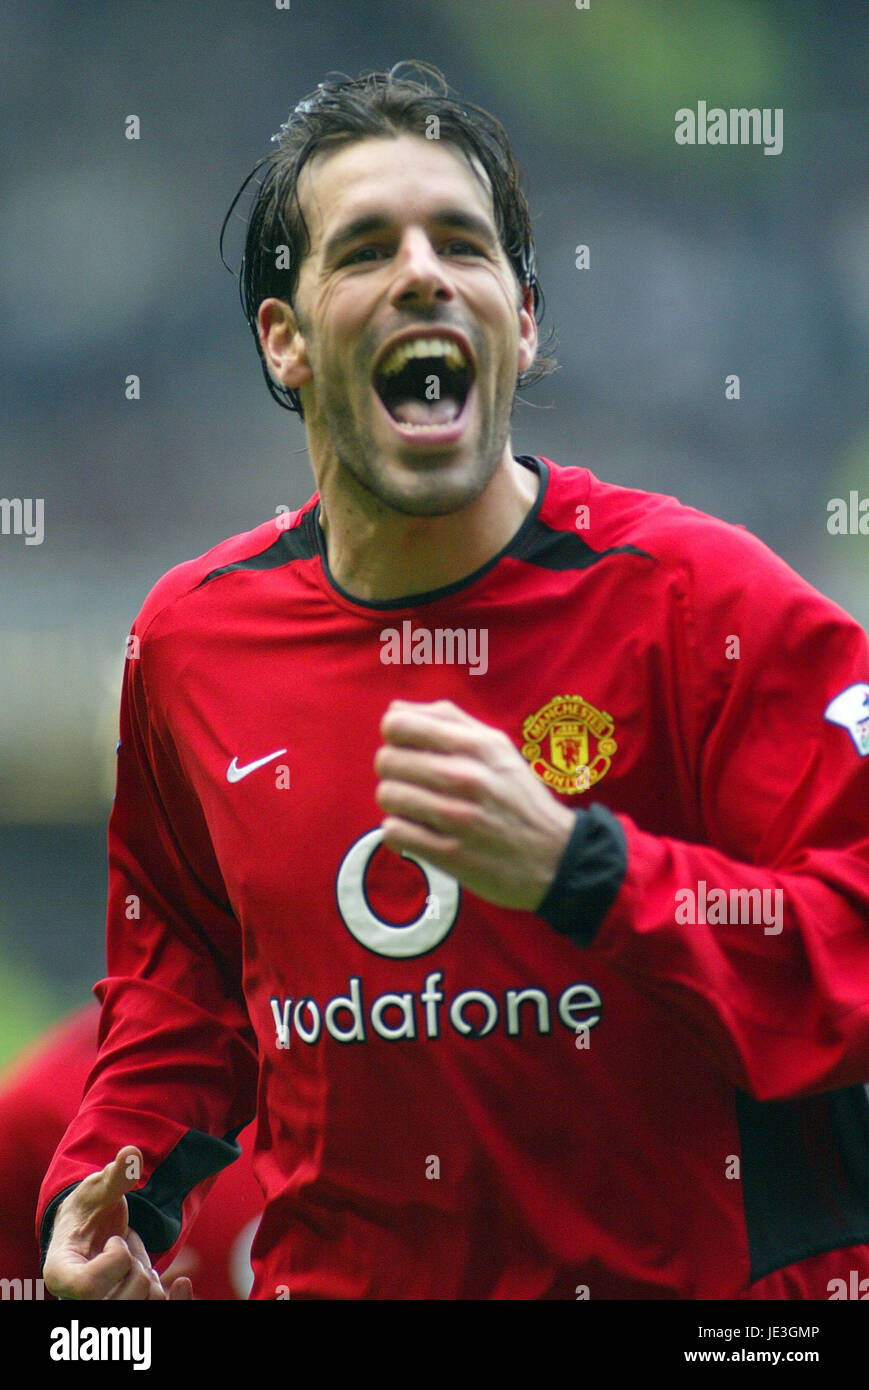 RUUD VAN NISTELROOY MANCHESTER UNITED FC OLD TRAFFORD MANCESTER 26 January 2003 Stock Photo